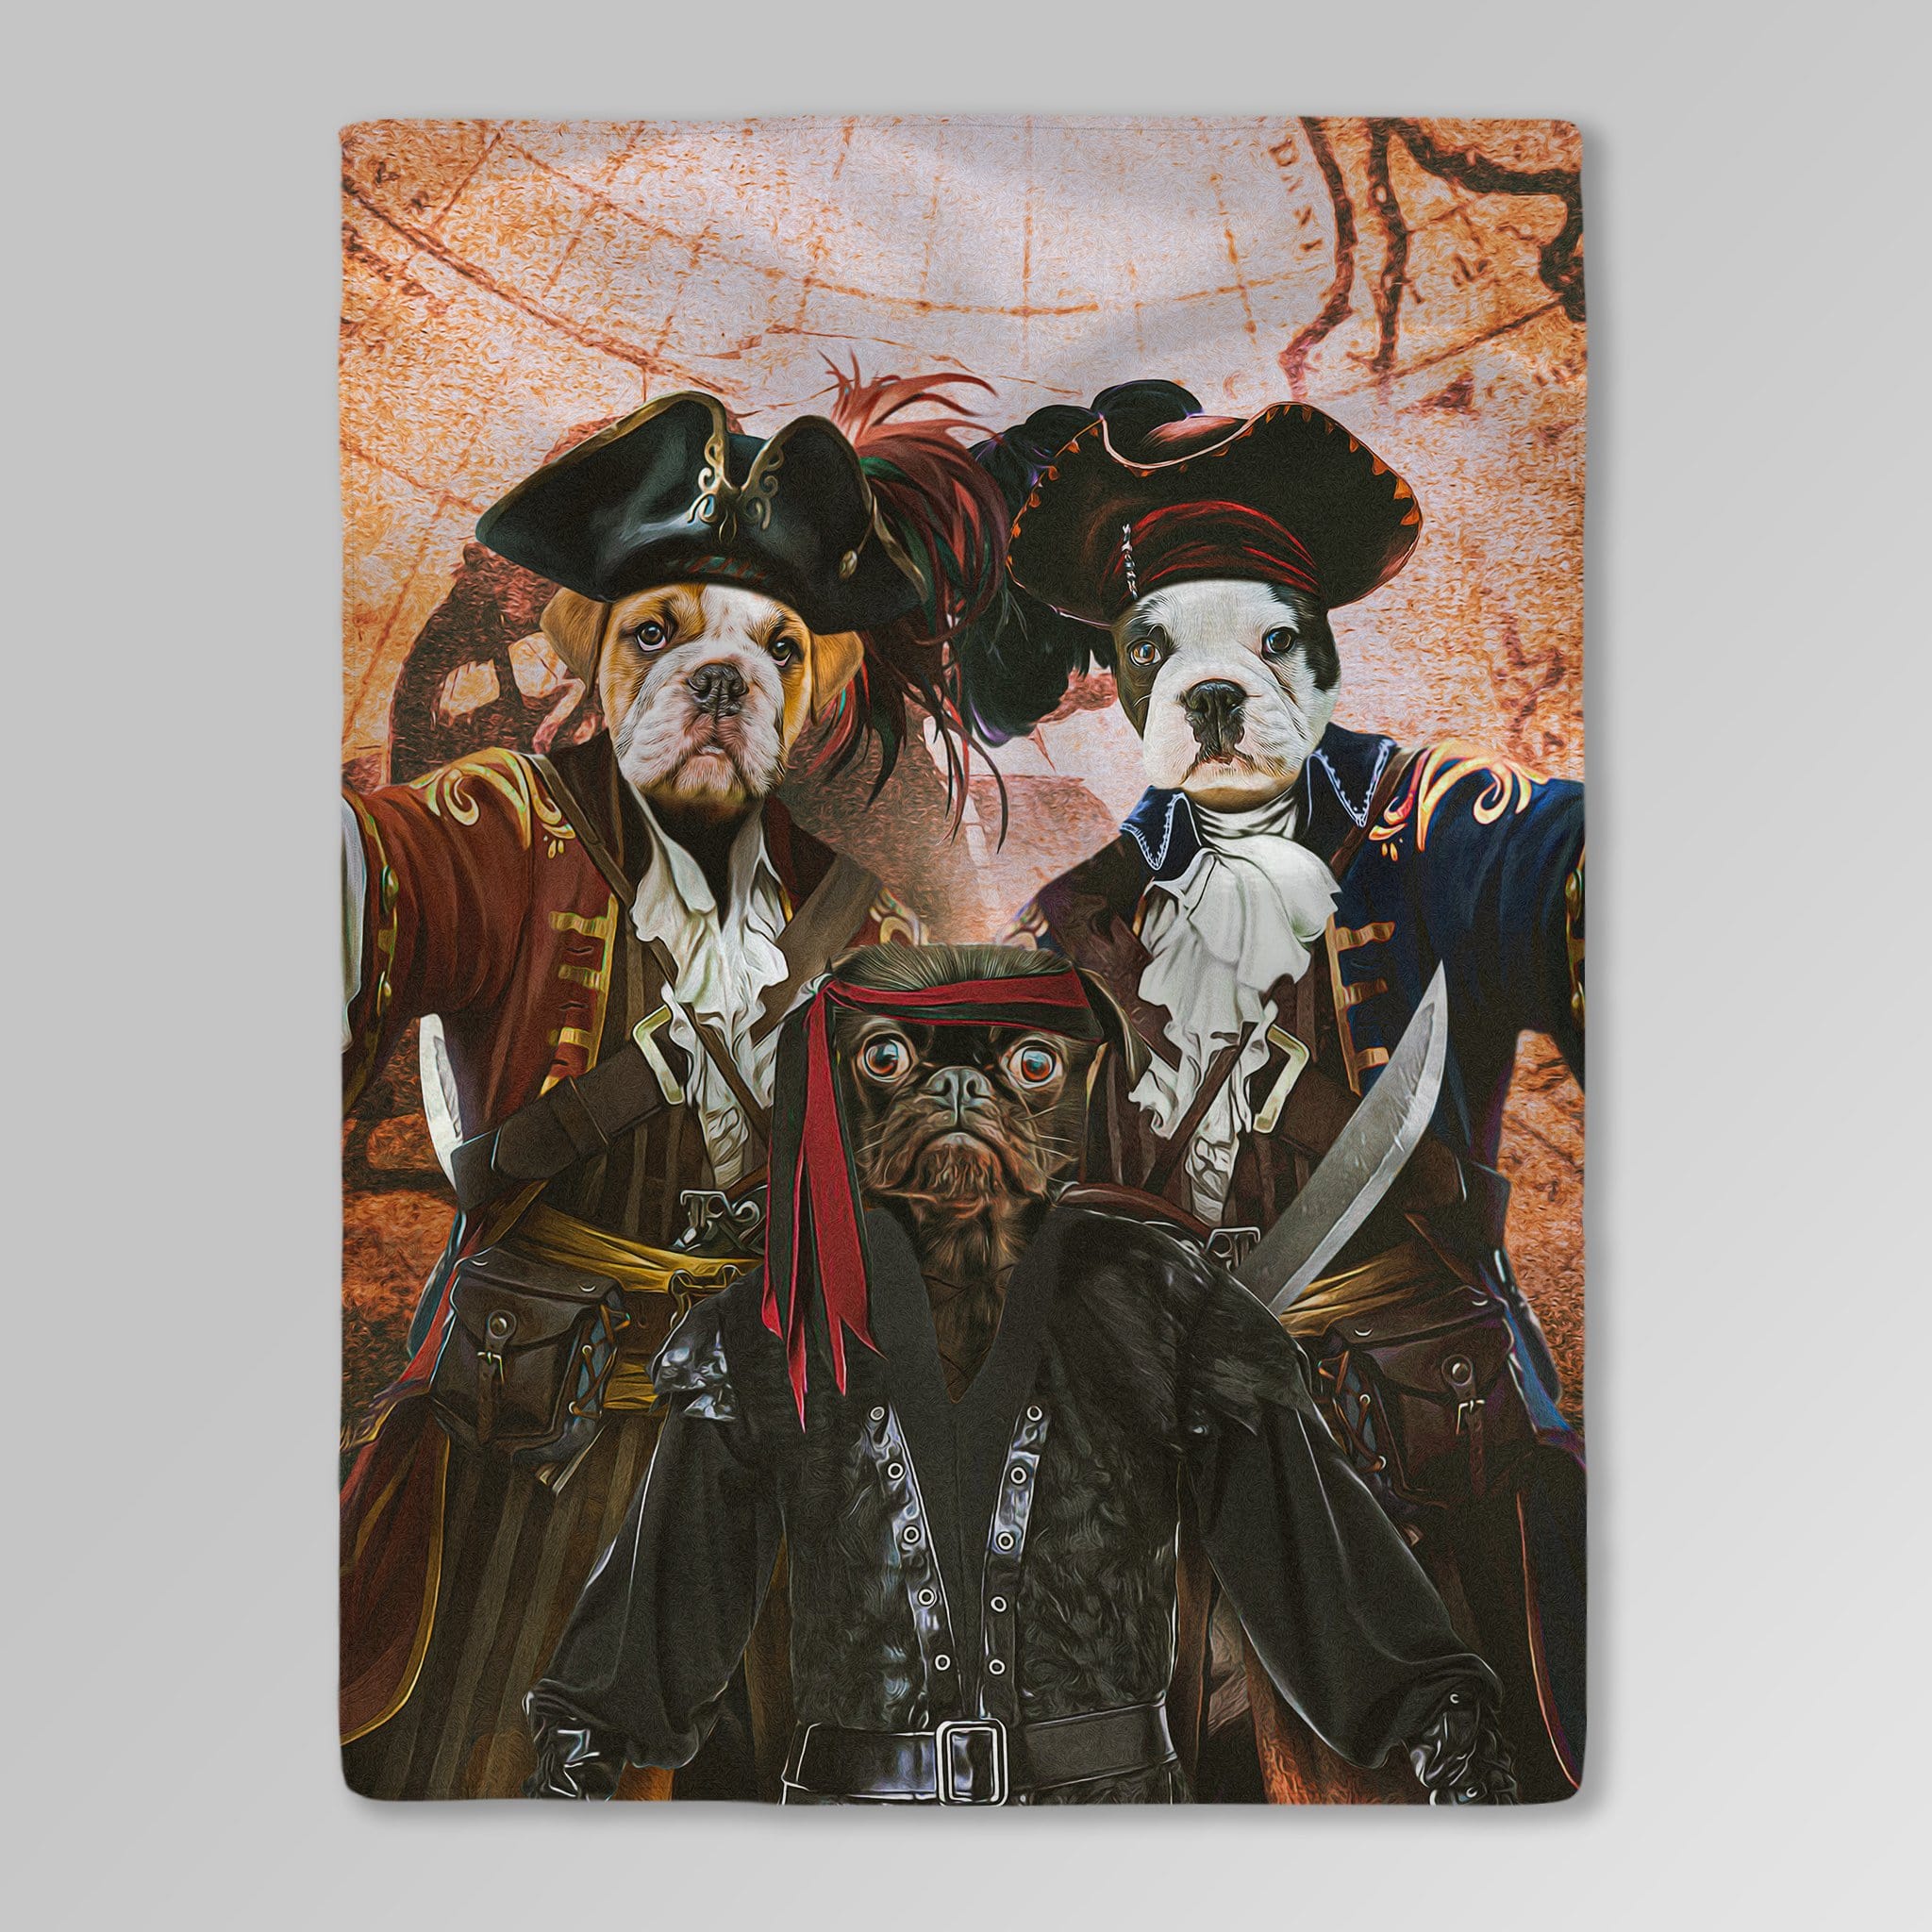 &#39;The Pirates&#39; Personalized 3 Pet Blanket